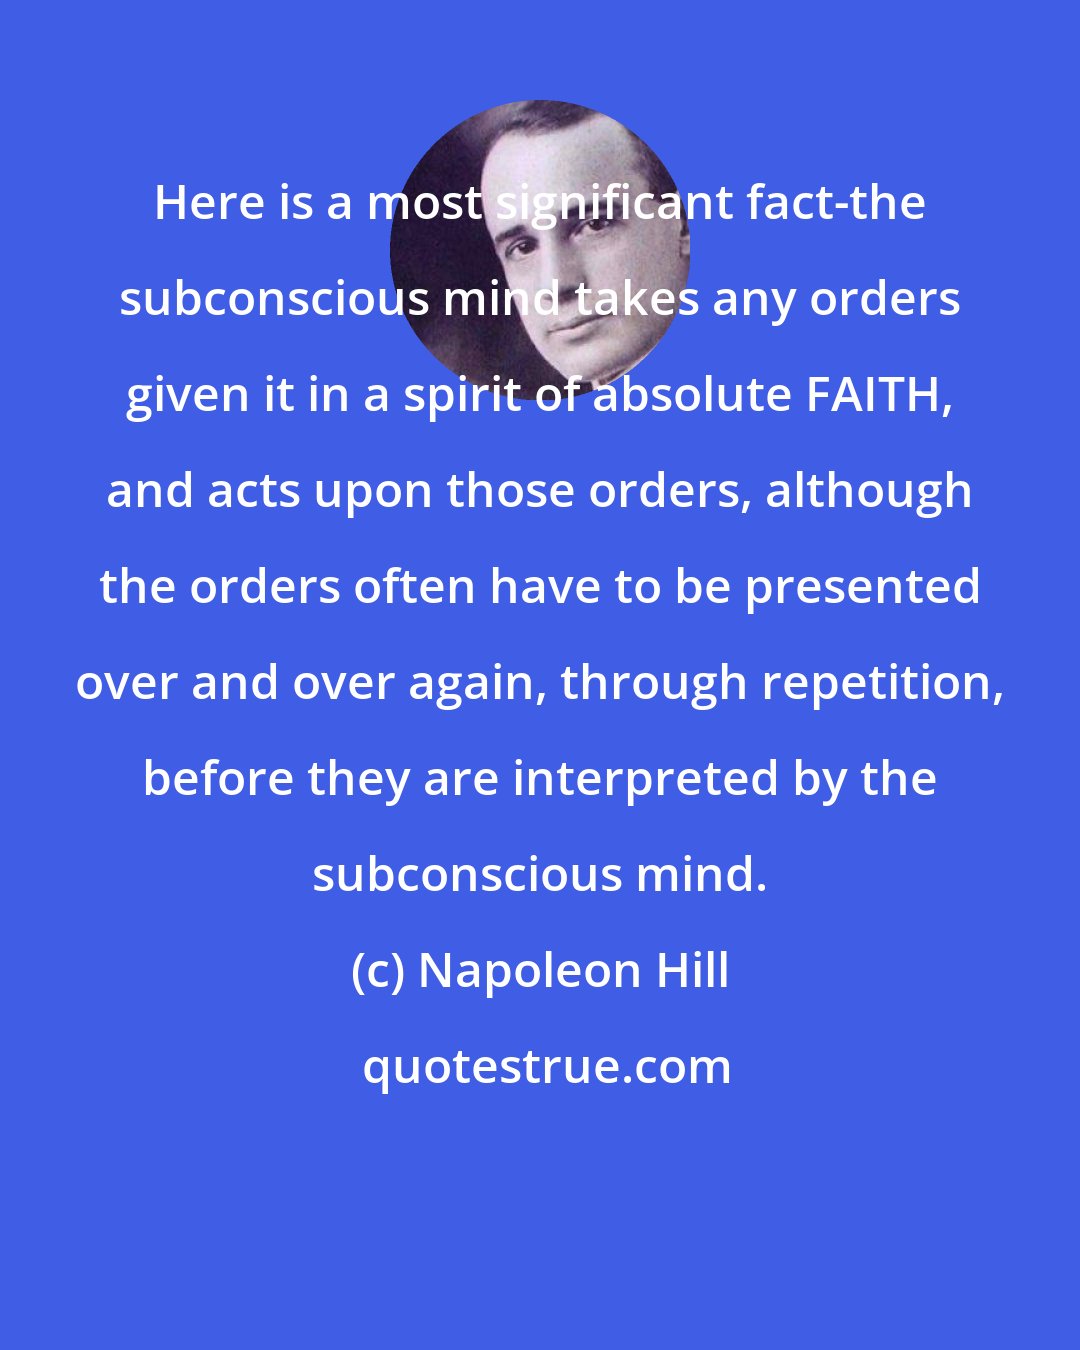 Napoleon Hill: Here is a most significant fact-the subconscious mind takes any orders given it in a spirit of absolute FAITH, and acts upon those orders, although the orders often have to be presented over and over again, through repetition, before they are interpreted by the subconscious mind.